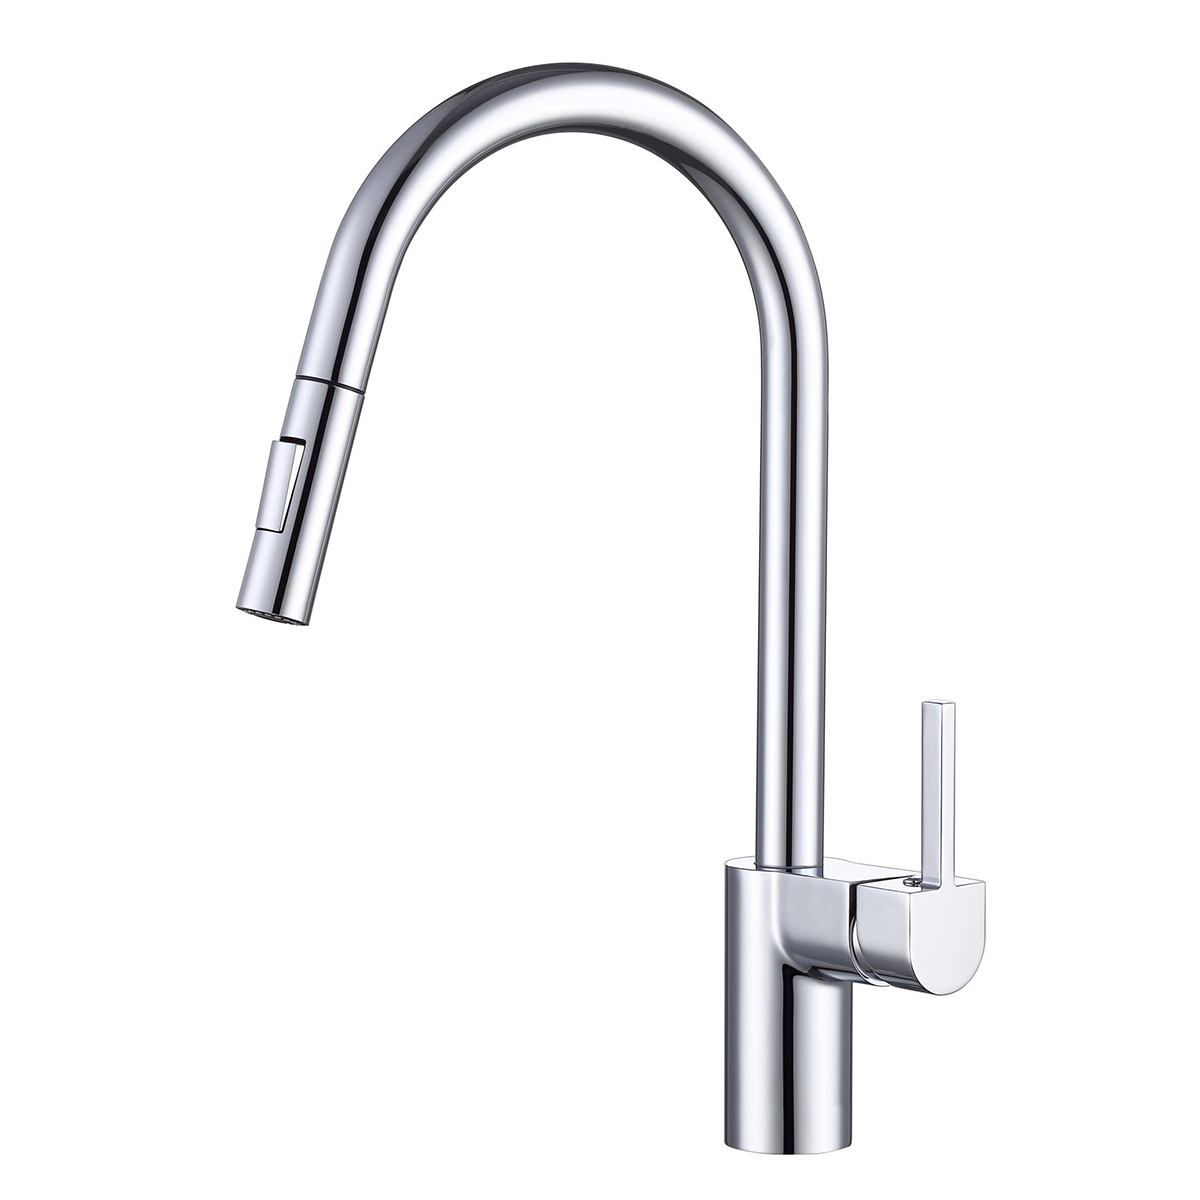 Aquacubic cUPC Best selling Single Handle Kitchen Faucets With Pull Down Spray Head 